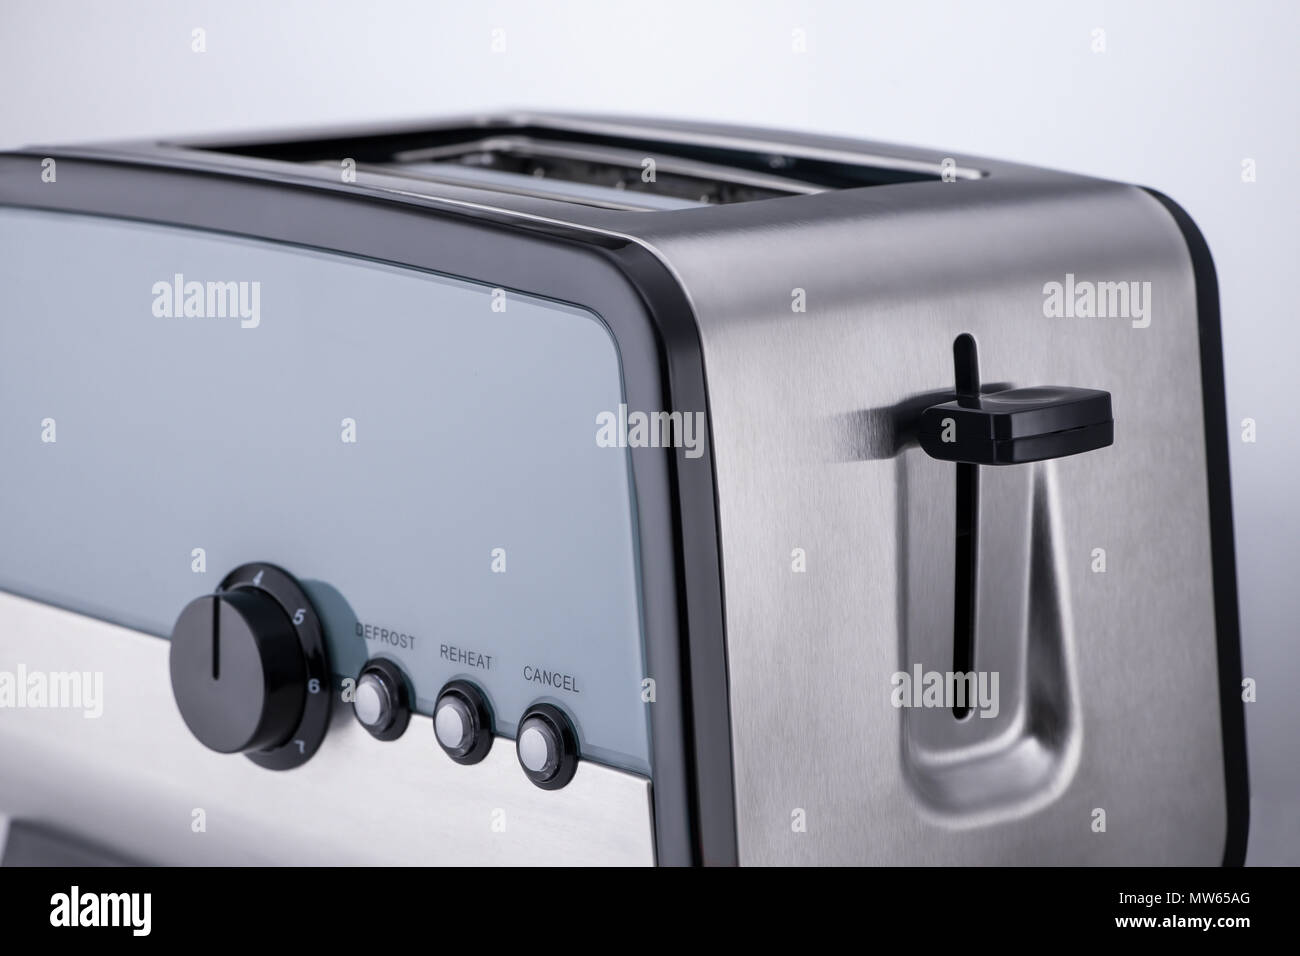 kitchen toaster on a light background, close-up. kitchen accessories Stock  Photo - Alamy